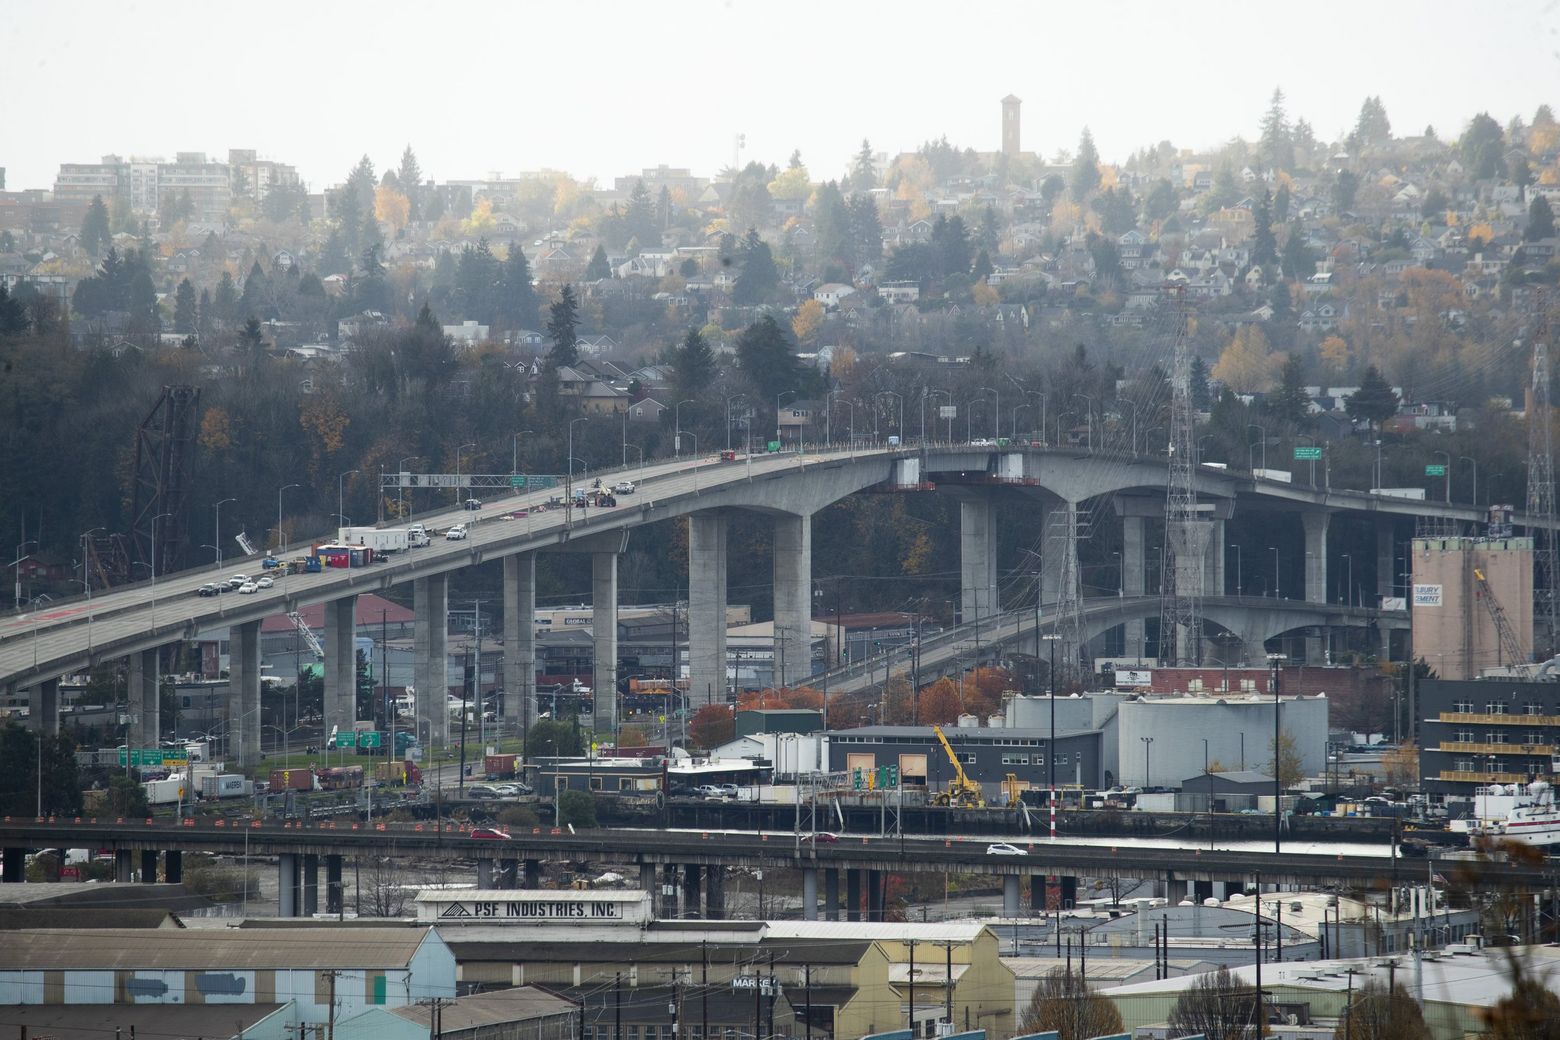 Mayor Durkan aims to repair and reopen the West Seattle Bridge by mid-2022.  Can the work move faster? | The Seattle Times